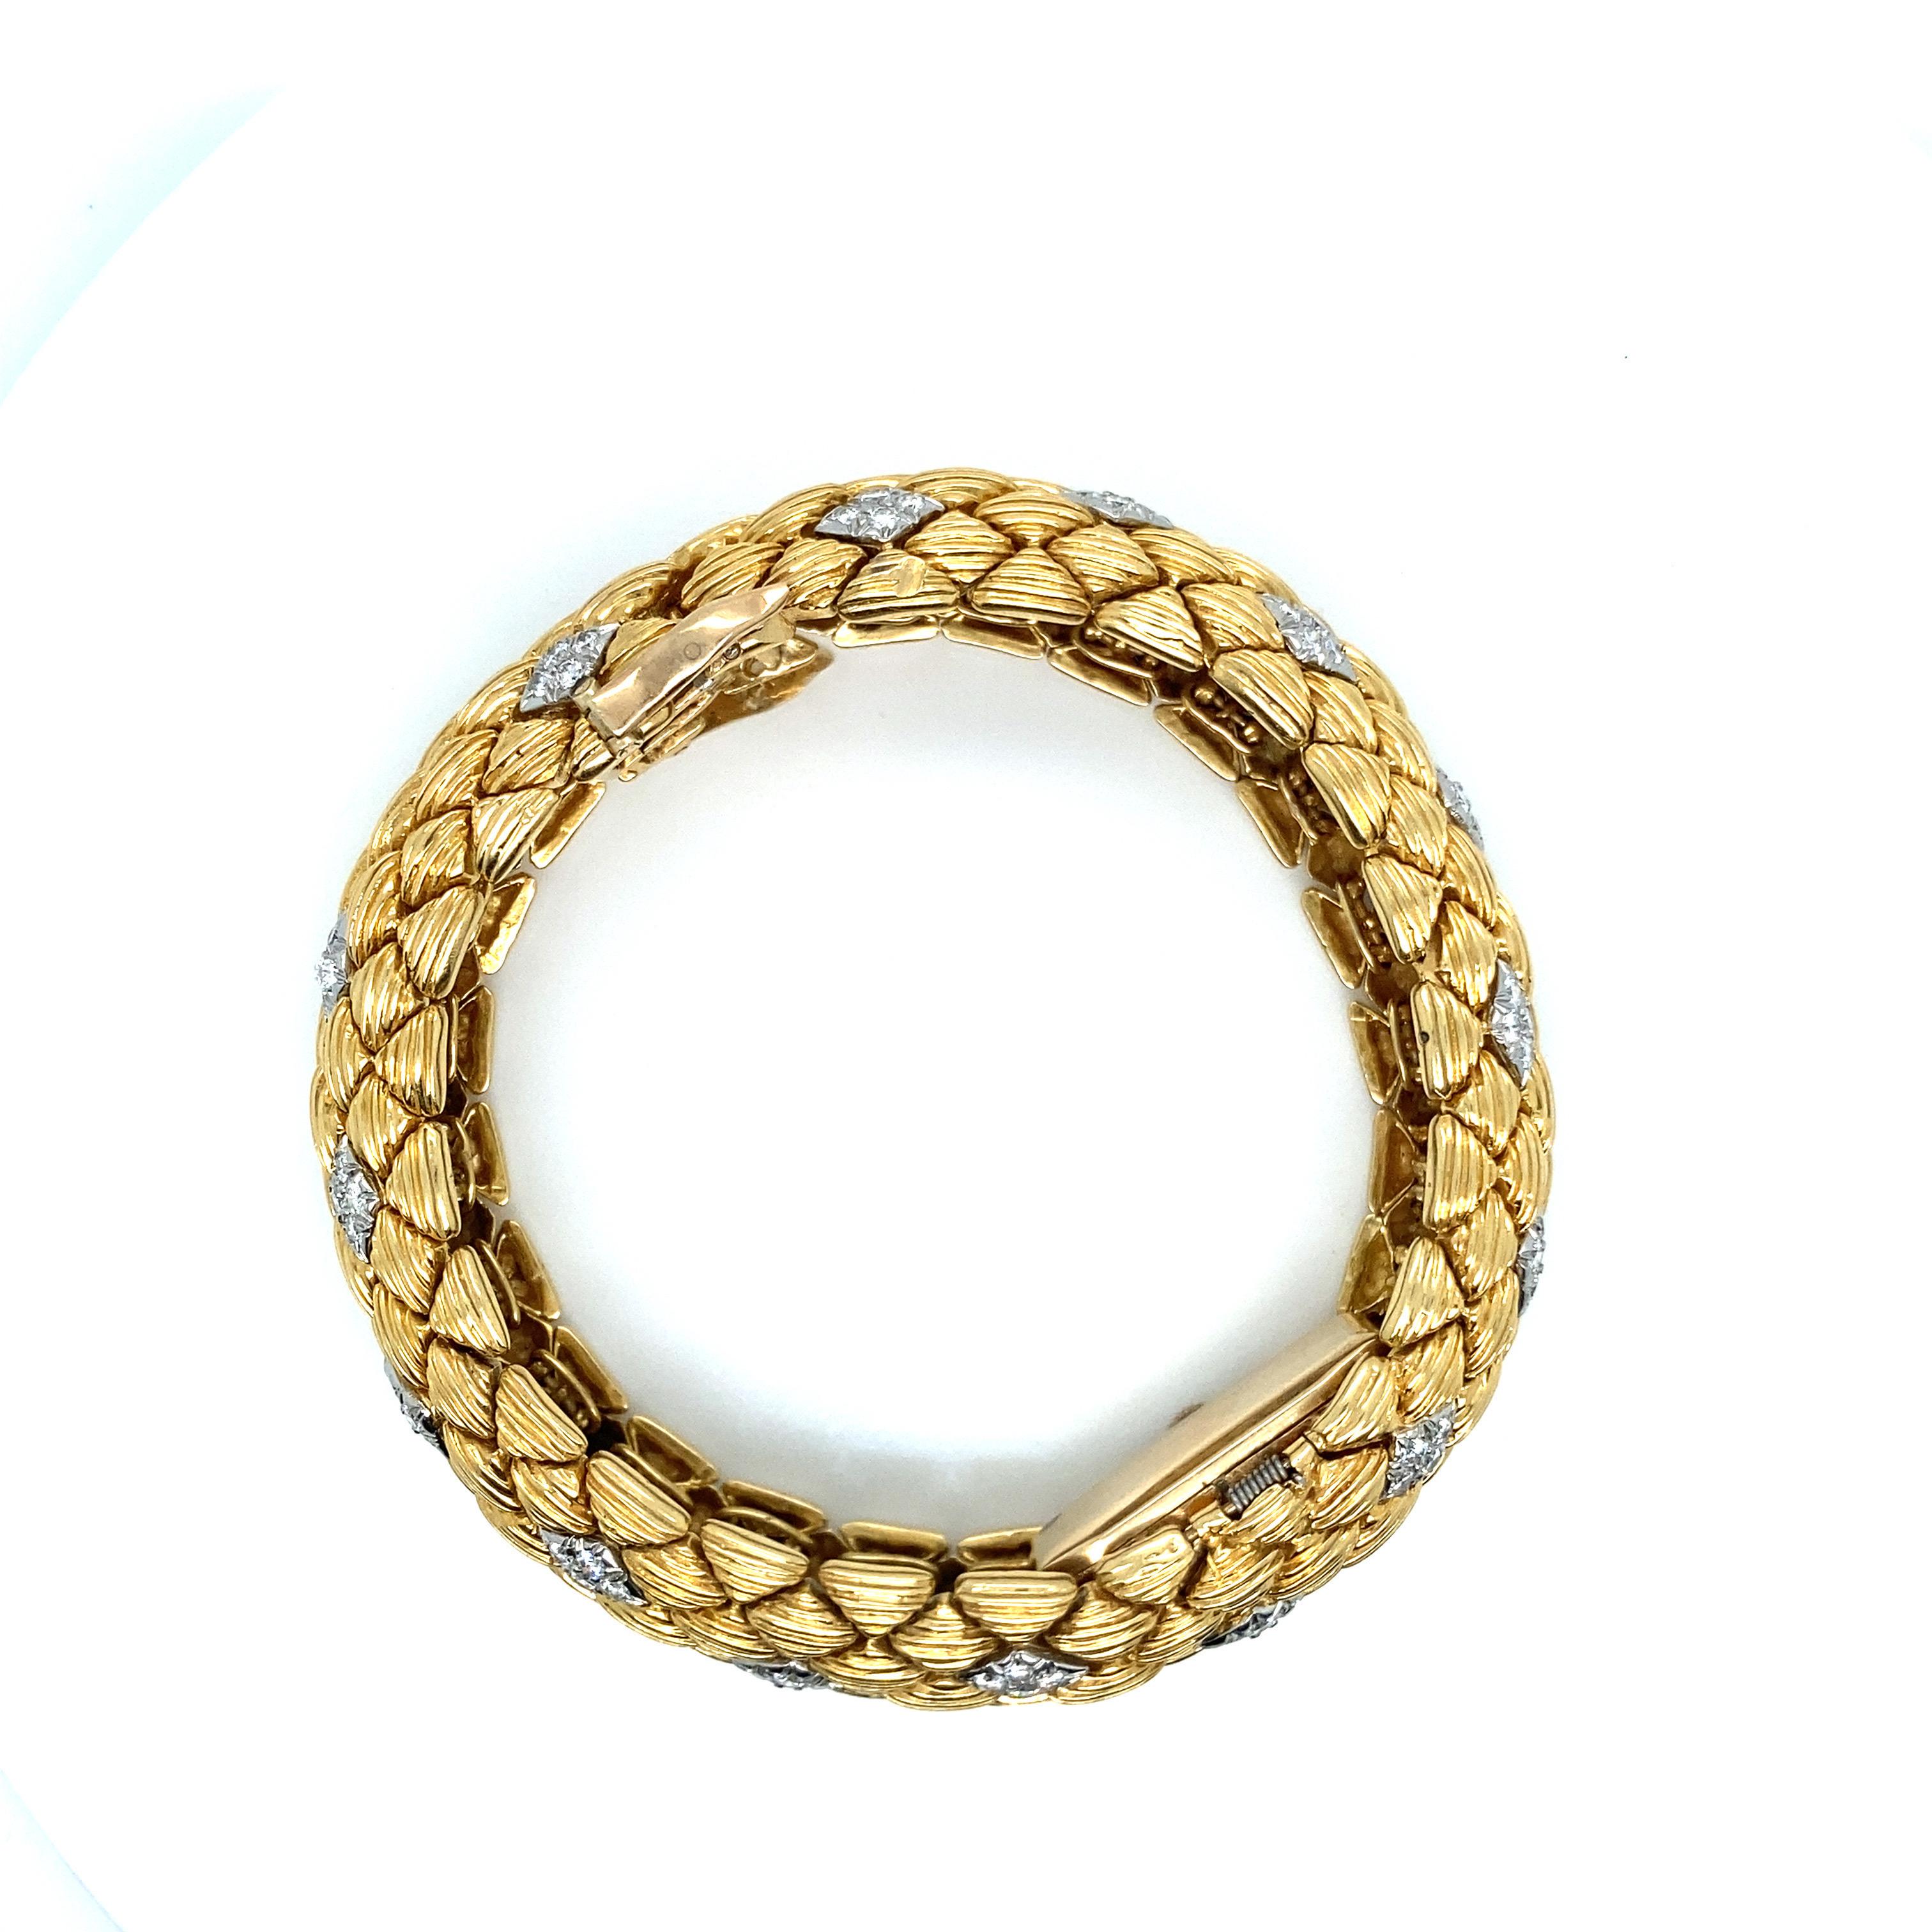 This extraordinary vintage piece is a true masterclass in luxury craftsmanship and design innovation. Handcrafted from heavy 18K yellow gold, the panther-style bracelet features meticulously corrugated links that exude a powerful, textured elegance.